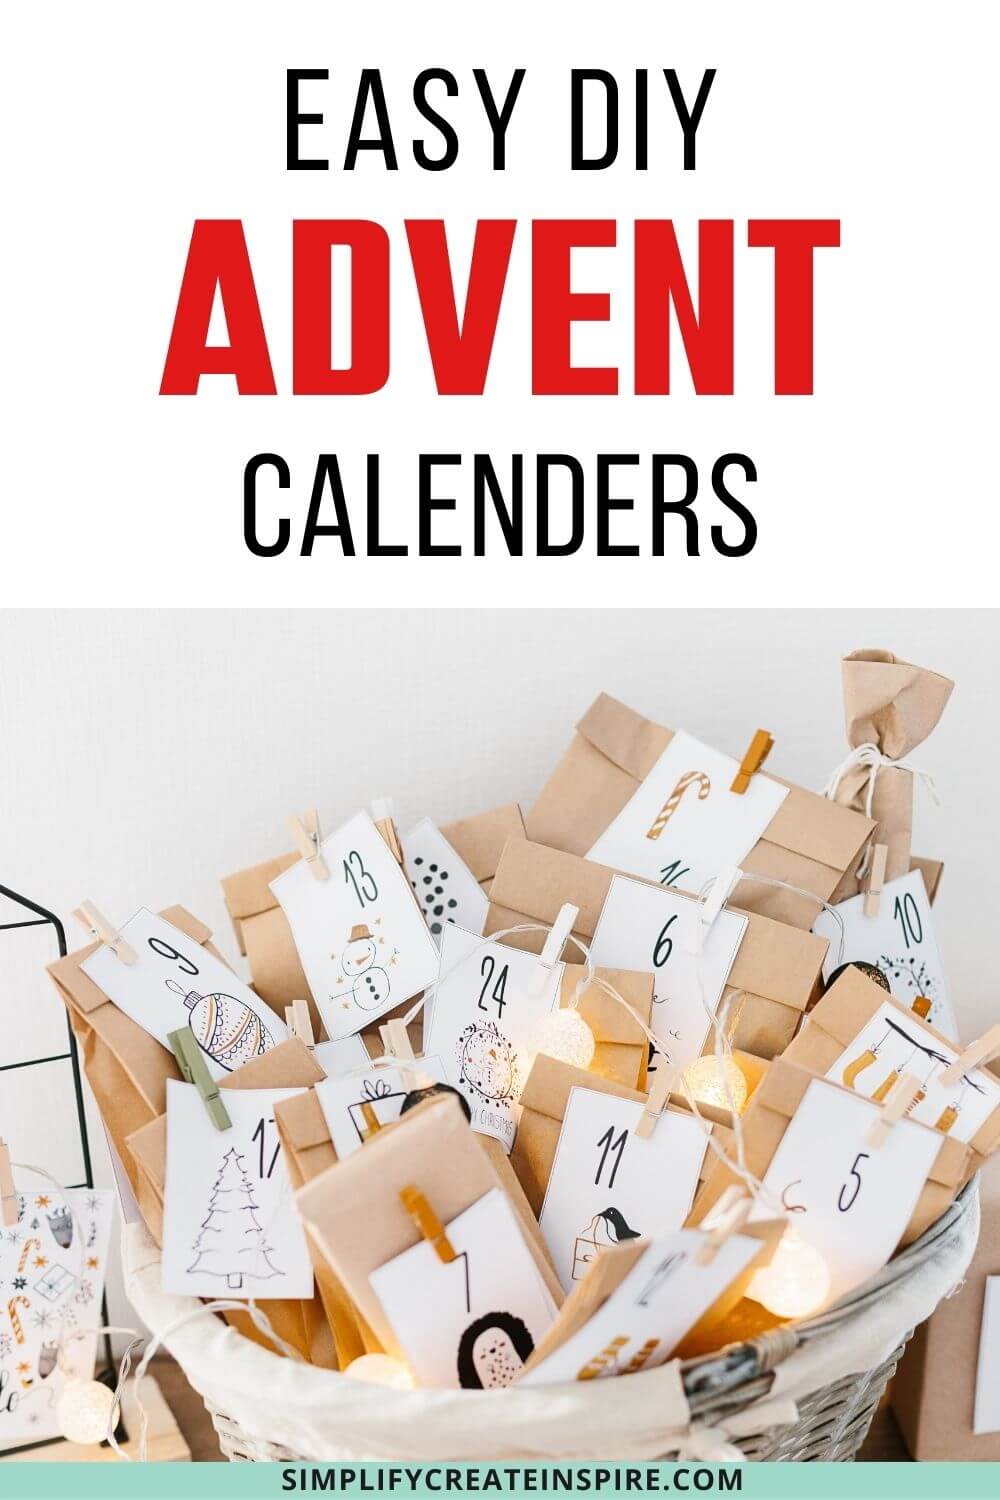 75 Ideas For Advent Calendar Gifts, Fillers And Activities (Updated For